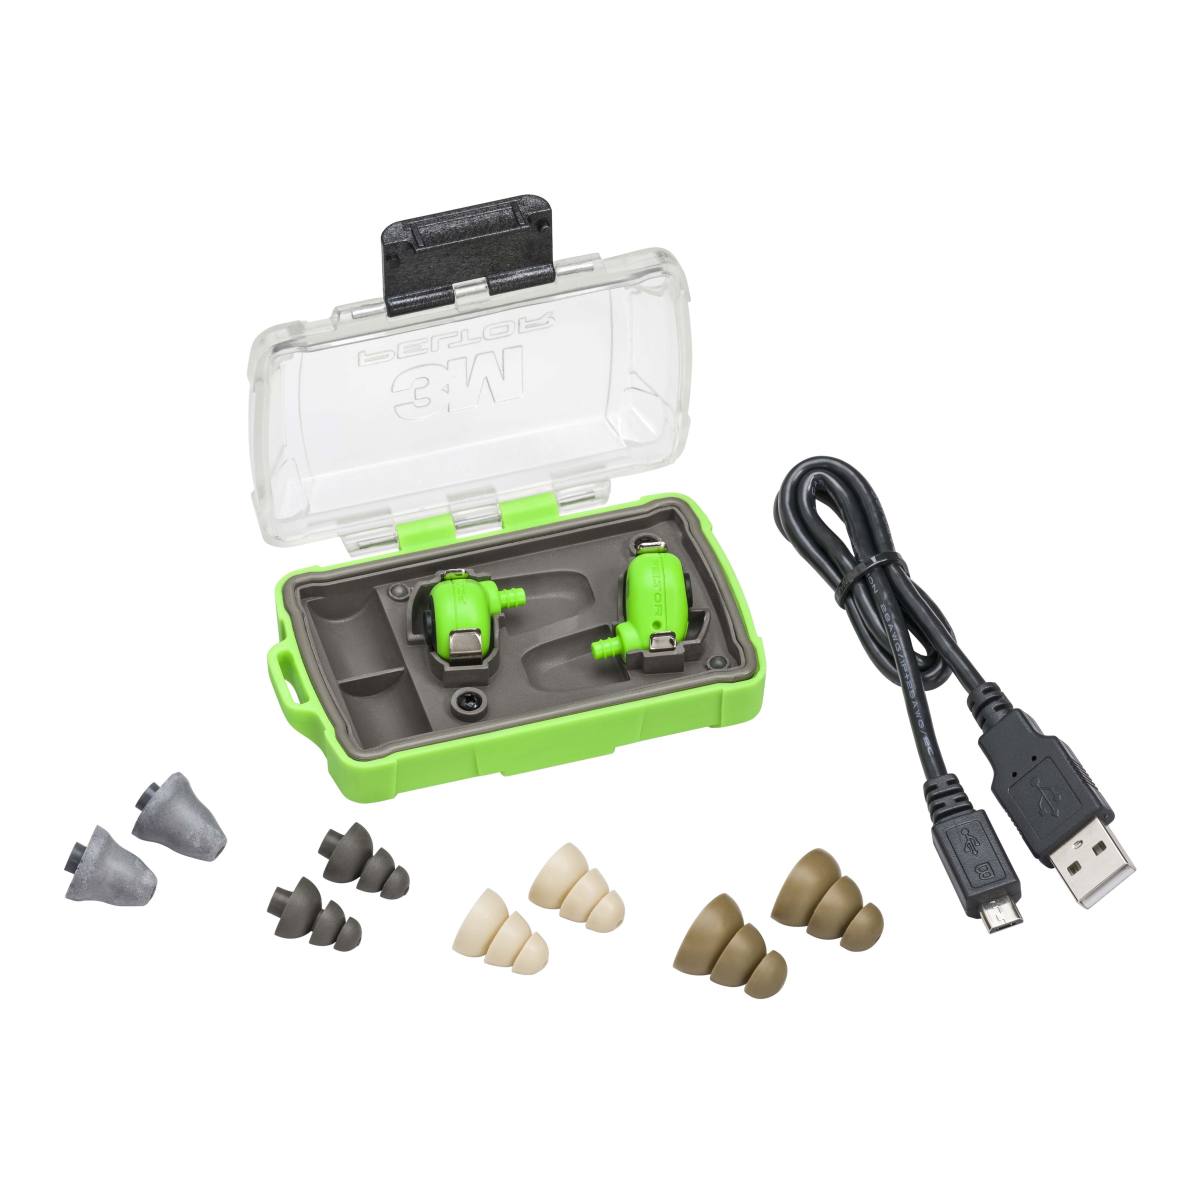 3M PELTOR EEP-100 EU electronic earplugs, set: earplugs and charging station (with closed lid and USB ports) are IP-54 rated and waterproof